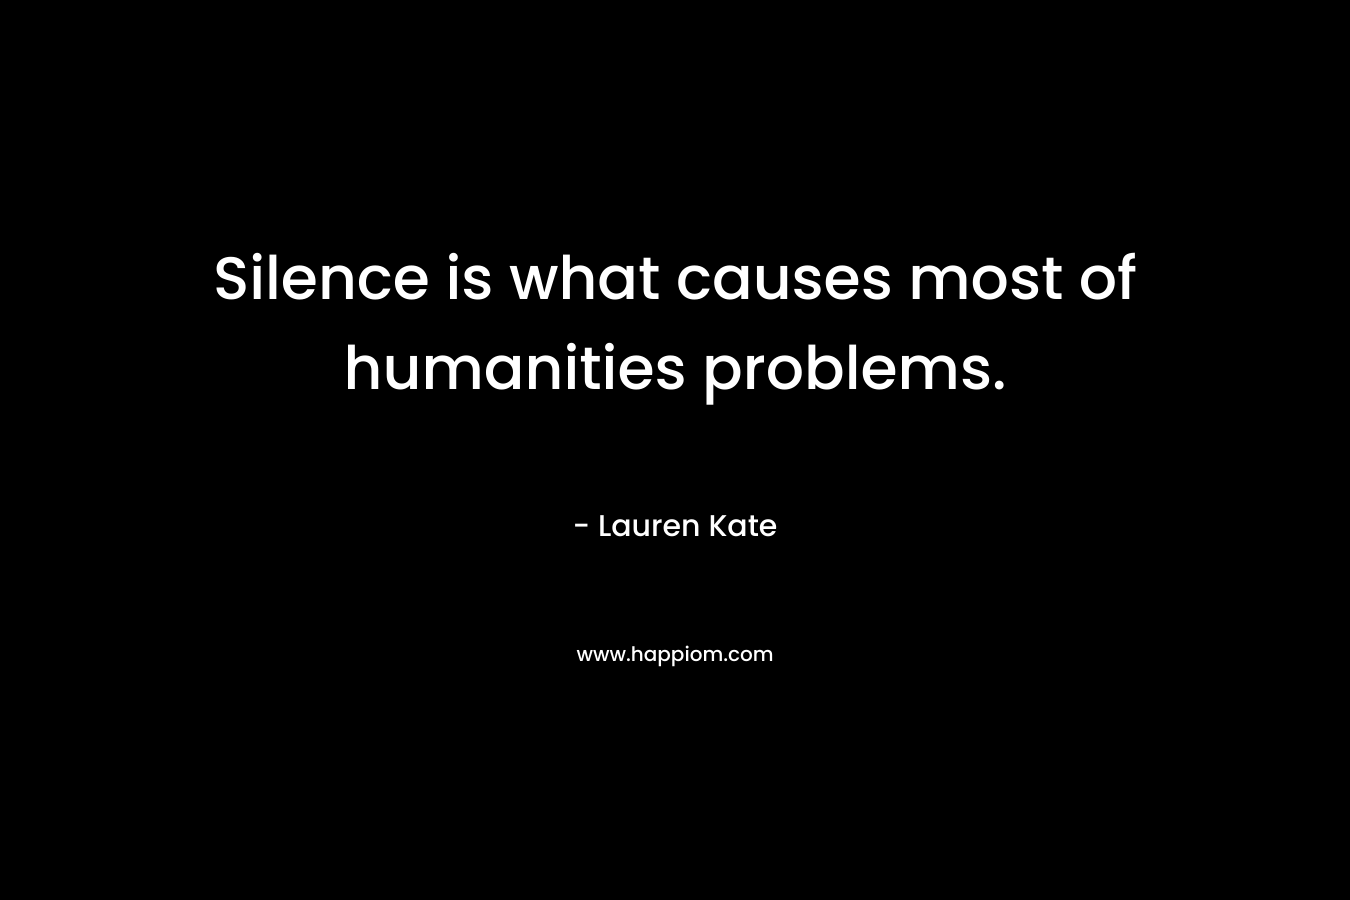 Silence is what causes most of humanities problems. – Lauren Kate